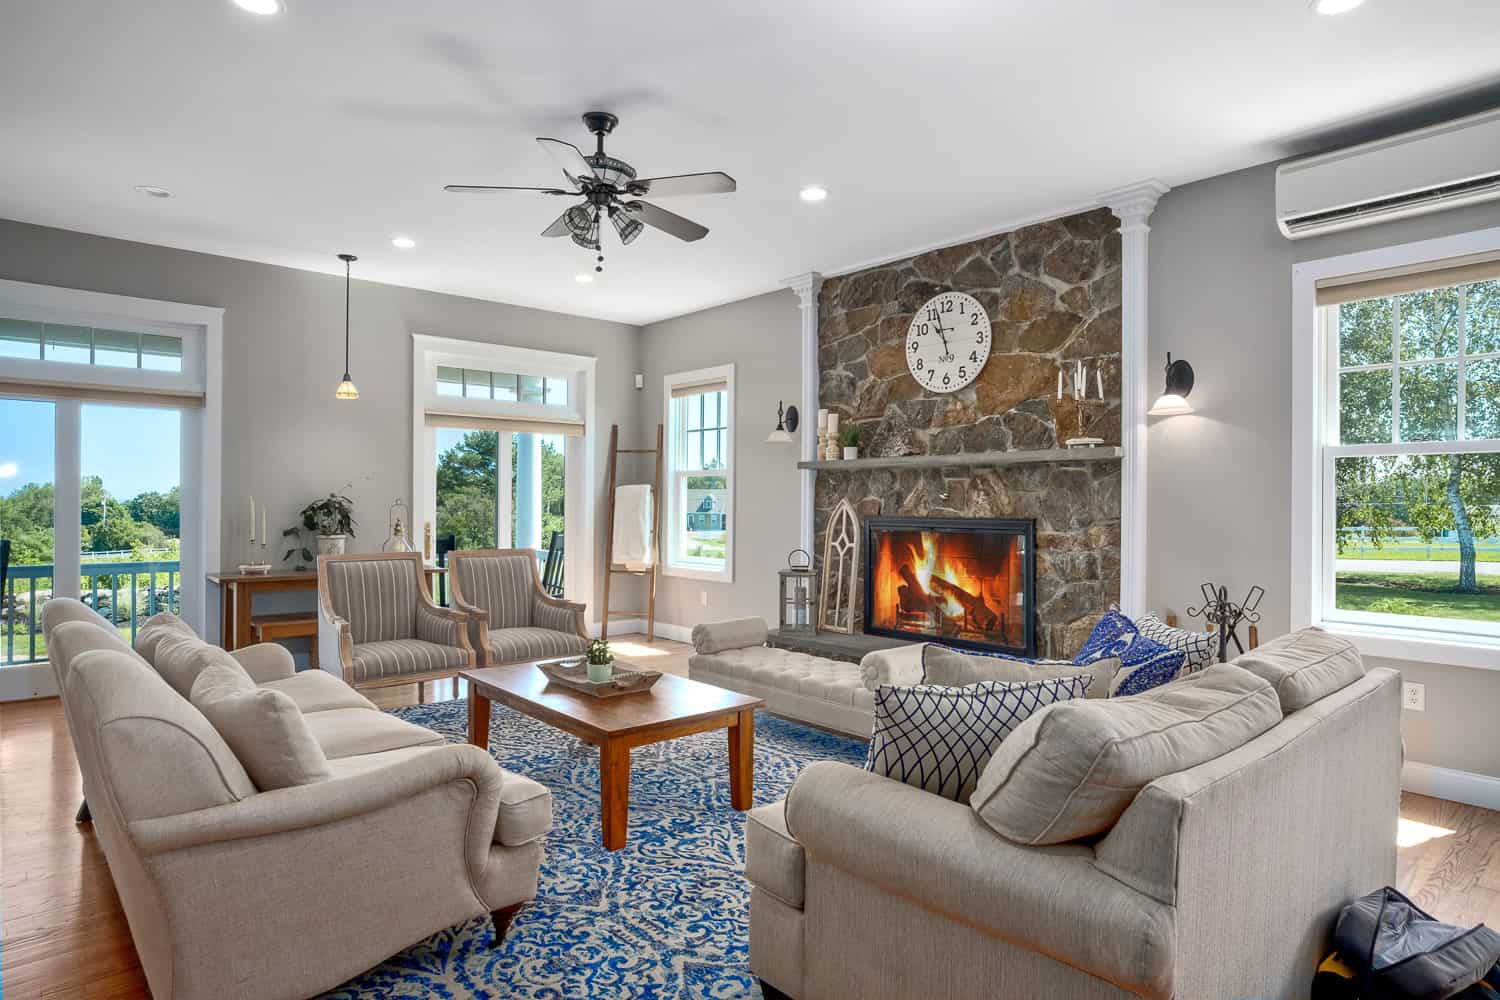 Spacious living room with stone fireplace, large windows, plush seating, and a blue area rug under a wooden coffee table.